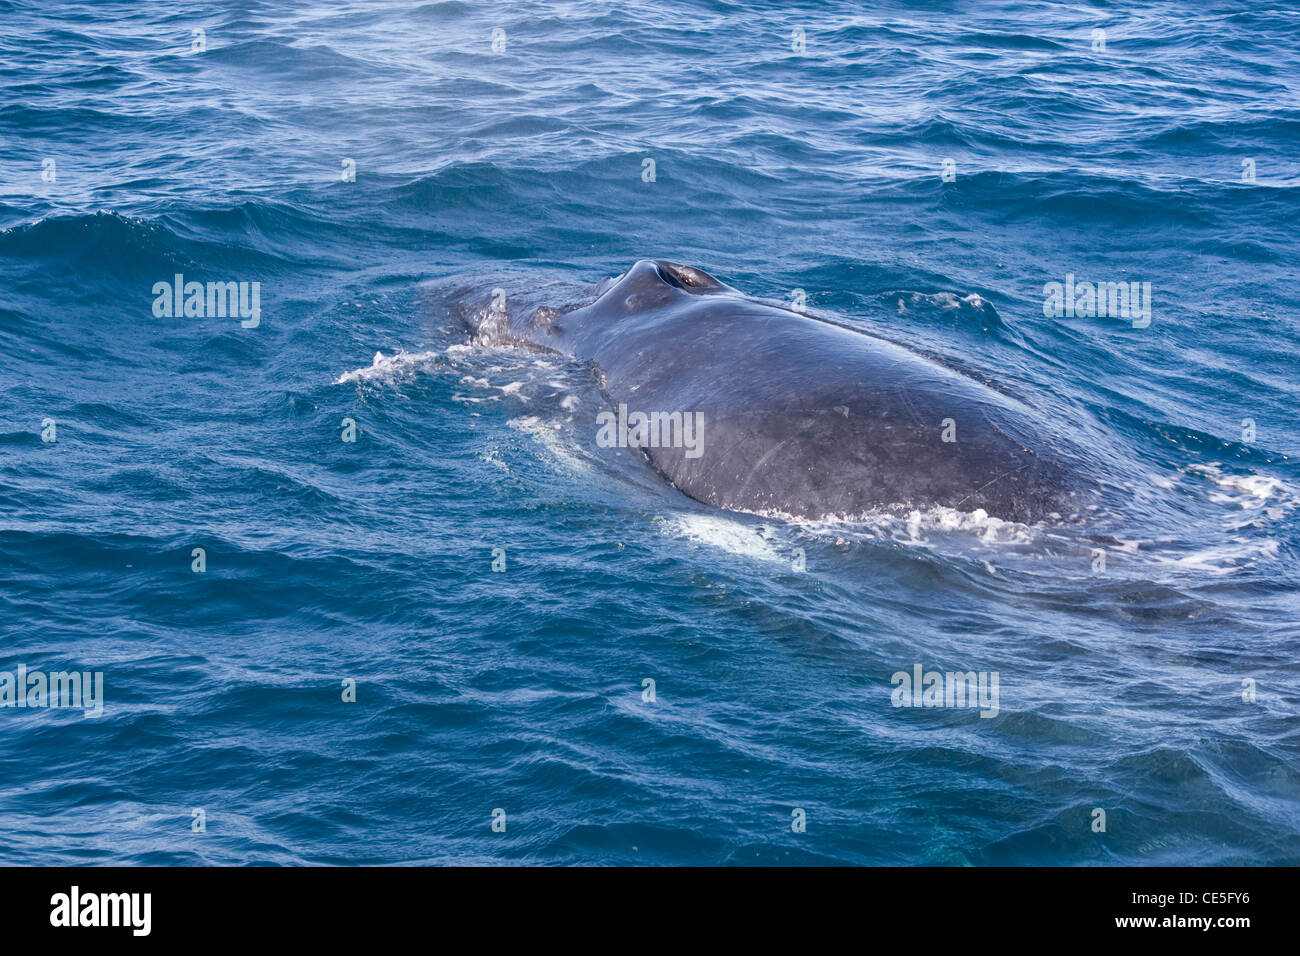 Blowhole of a Humpback Whale in Exmouth, Western Australia. Stock Photo